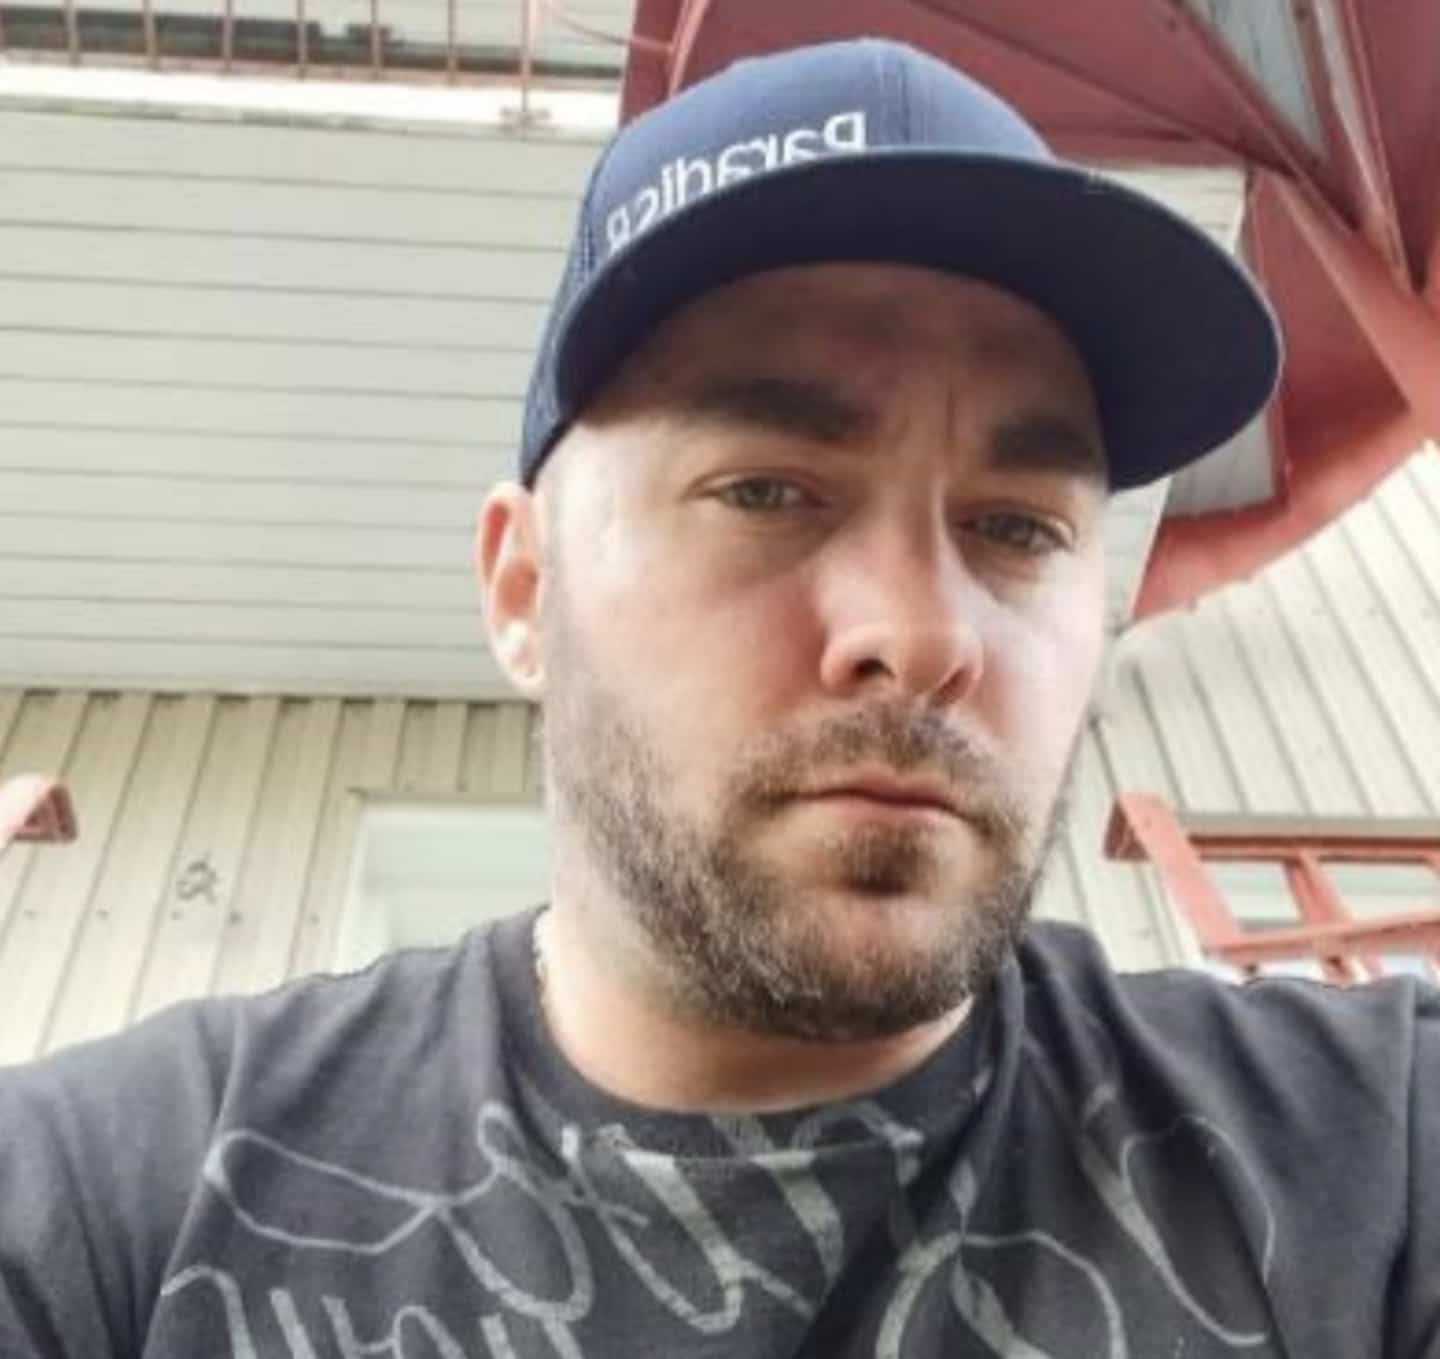 Disappearance in Lévis: a 34-year-old man has been missing since Tuesday